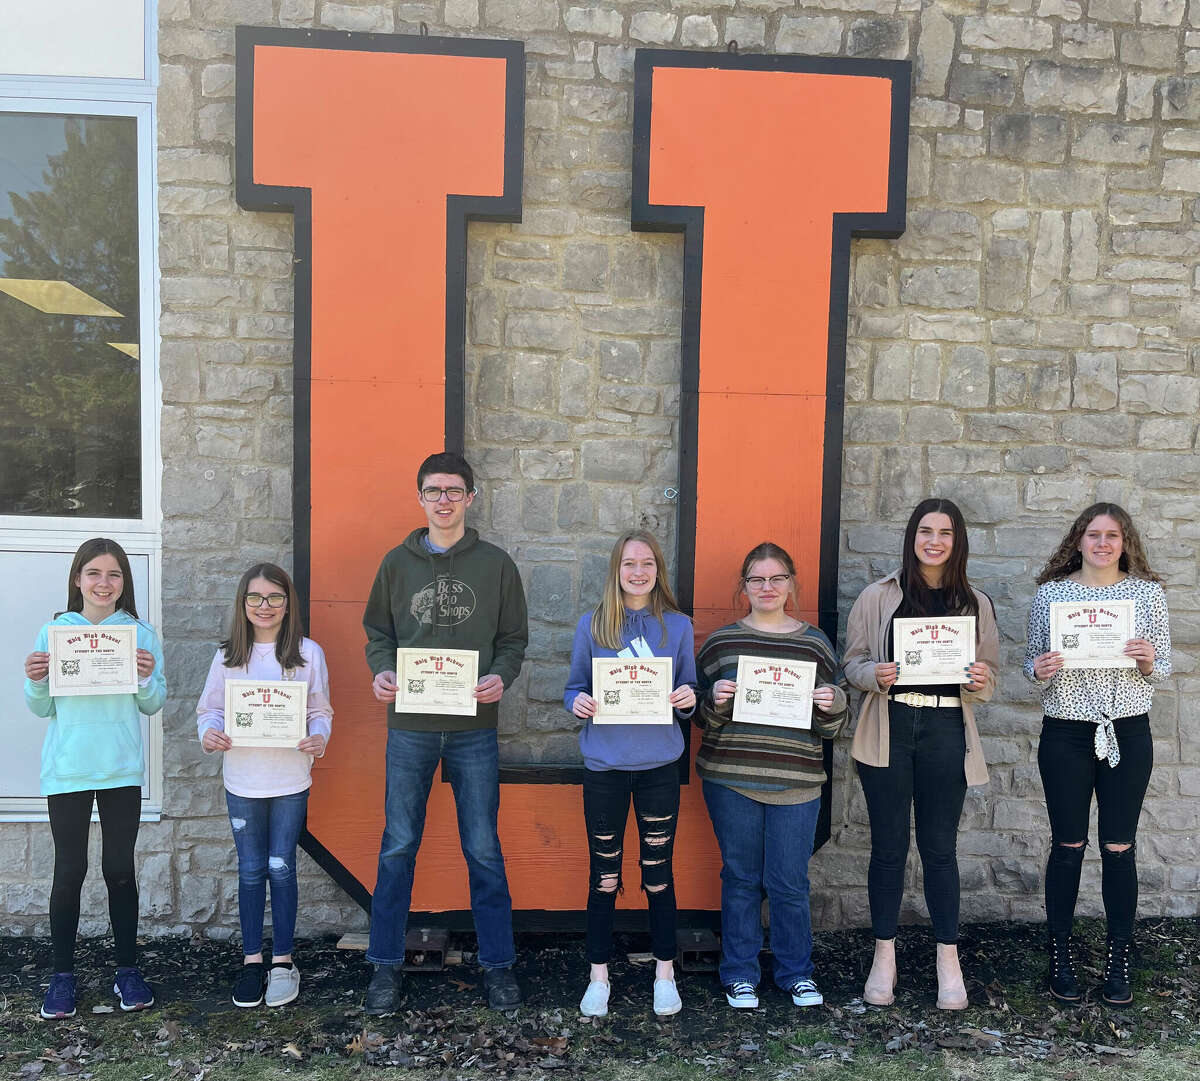 Ubly's March students of the month include: Madelyn Johnson, sixth grade; Lily Wright, seventh grade; Blake Pfaff, eighth grade; Morgan Schulte, ninth grade, Rose Brilinski, 10th grade; Samantha Warczinsky, 11th grade; and Alexiss Guigar, 12th grade. Students are pictured left to right according to grade.